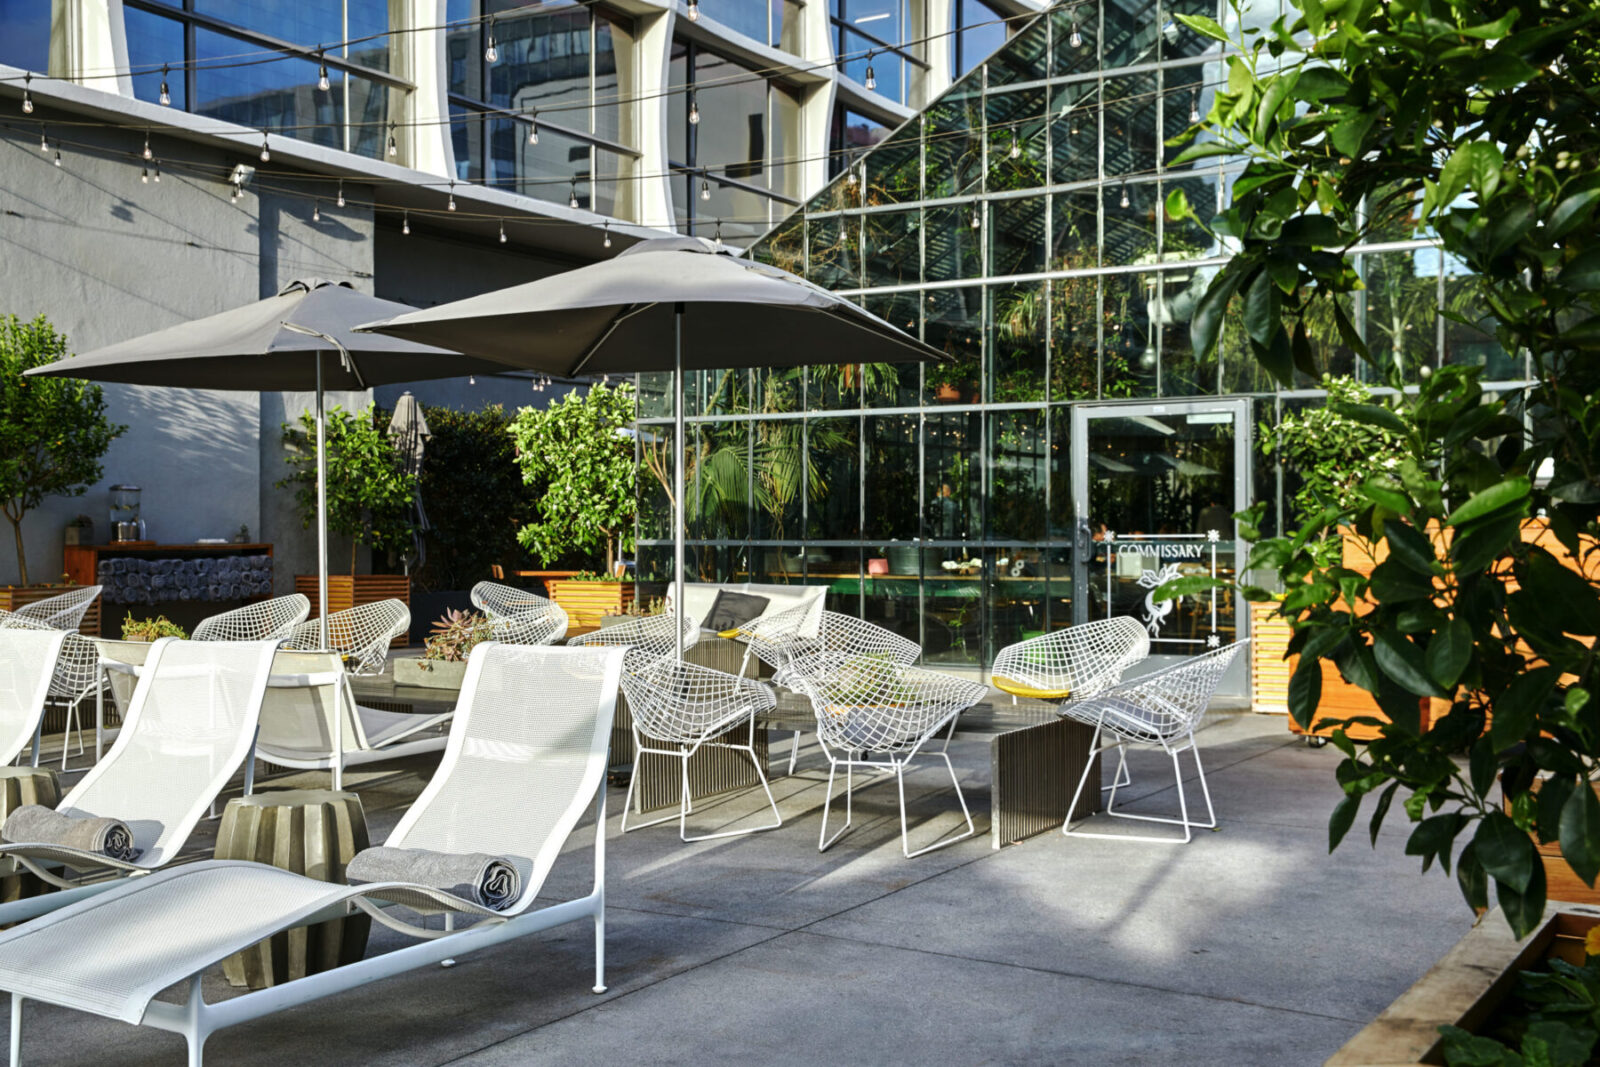 picture of chairs and tables out of restaurants with some plants